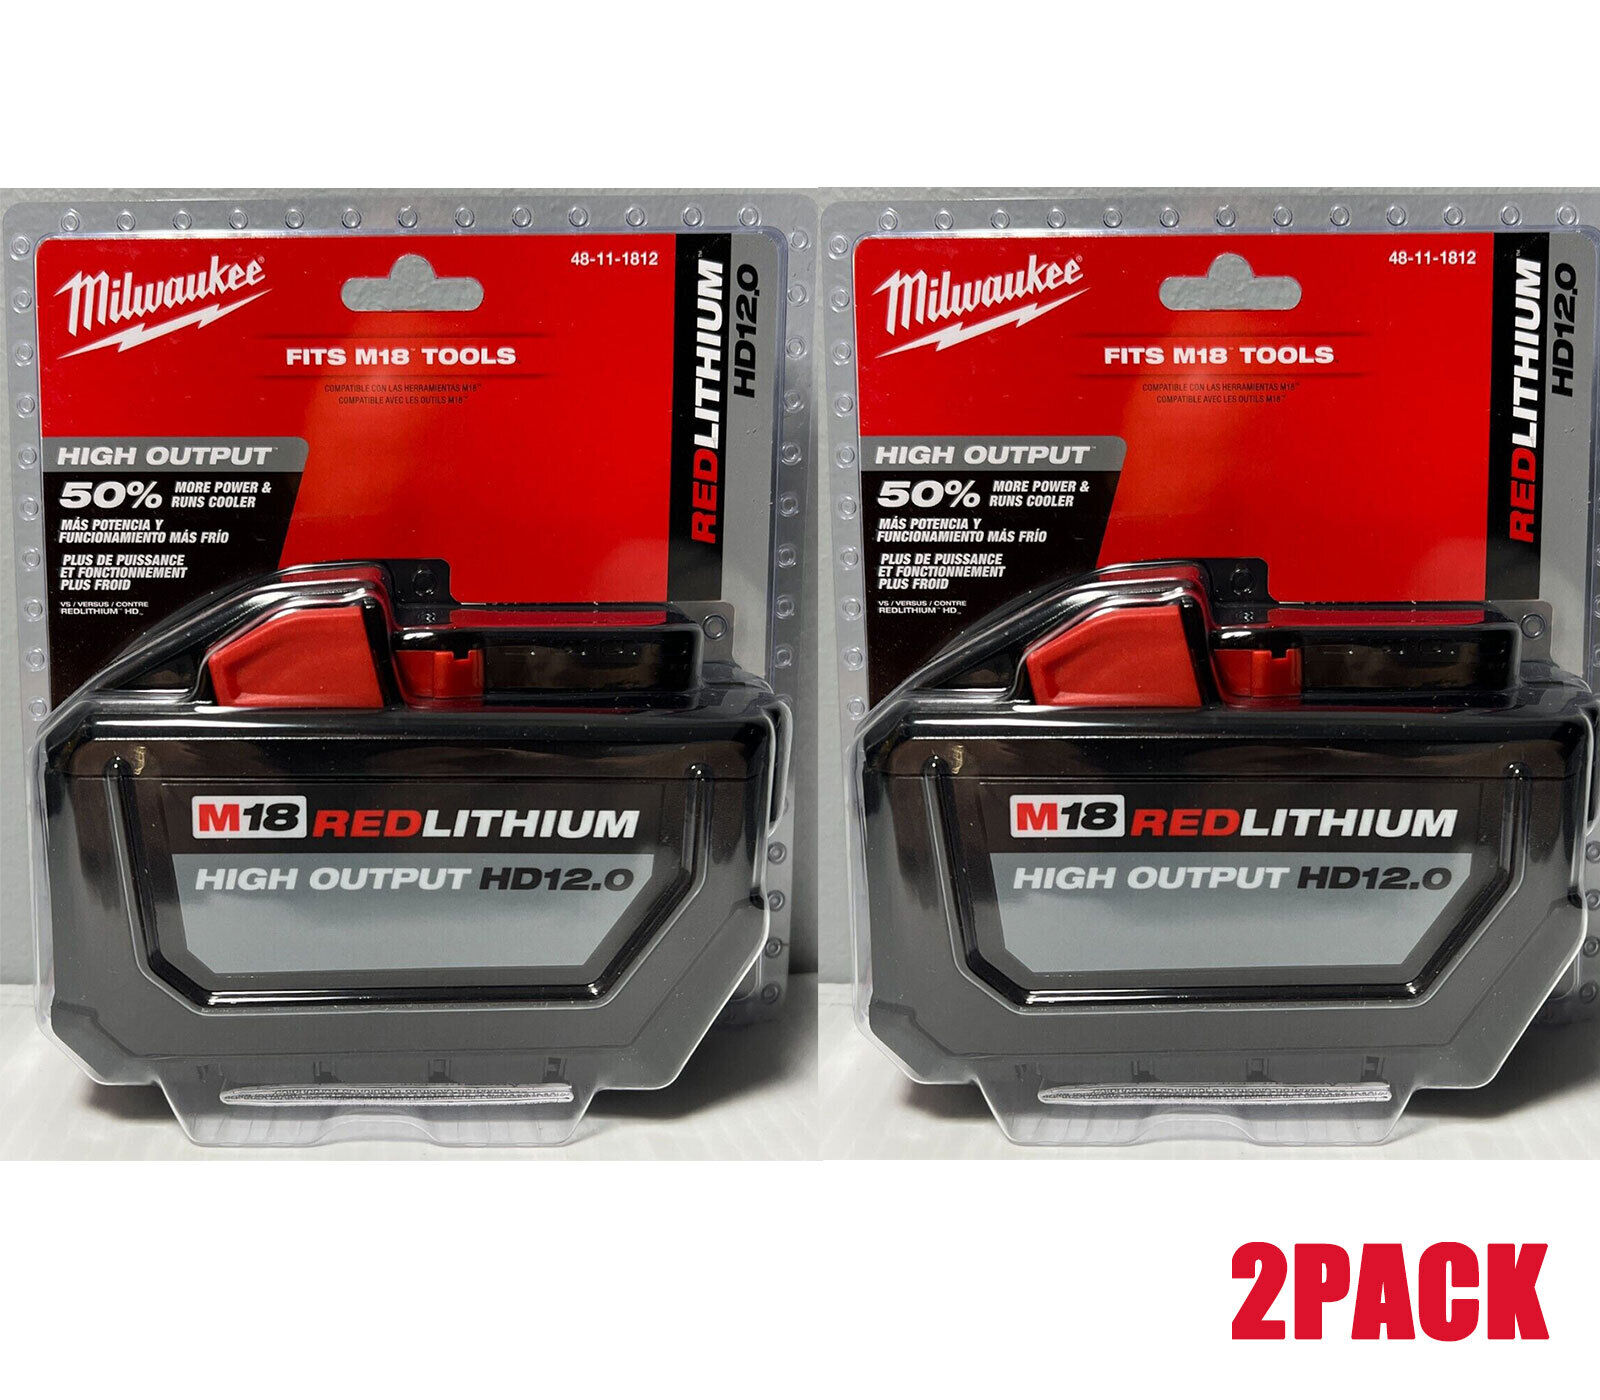 2 Pack Milwaukee 48-11-1812 M18 RedLithium High Output HD 12.0 Battery